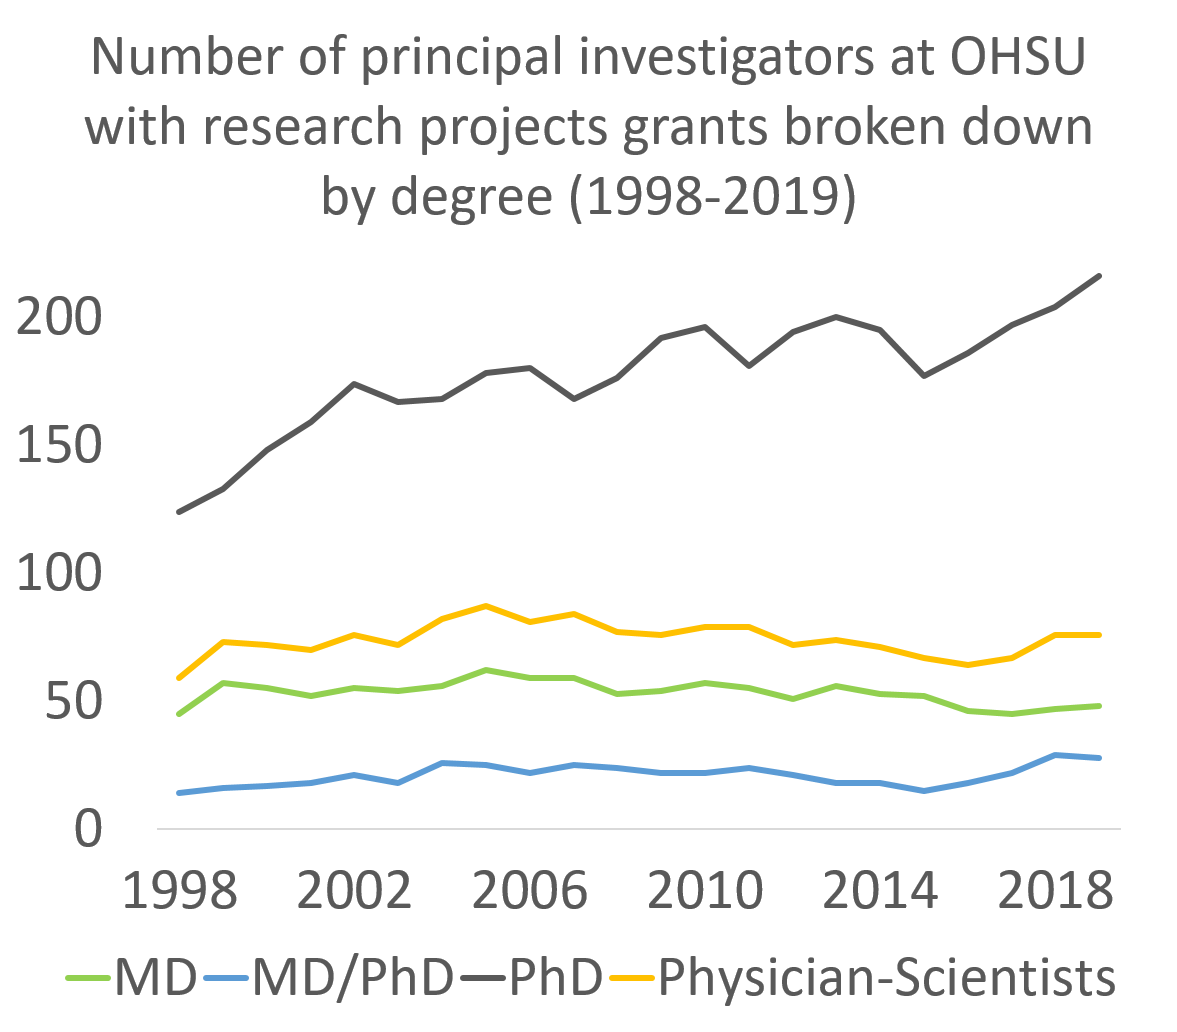 Line graph showing the type and number of research project grant awardees at OHSU from 1998 to 2019. The number goes up for PhDs but is stagnant for MDs and MD/PhDs.